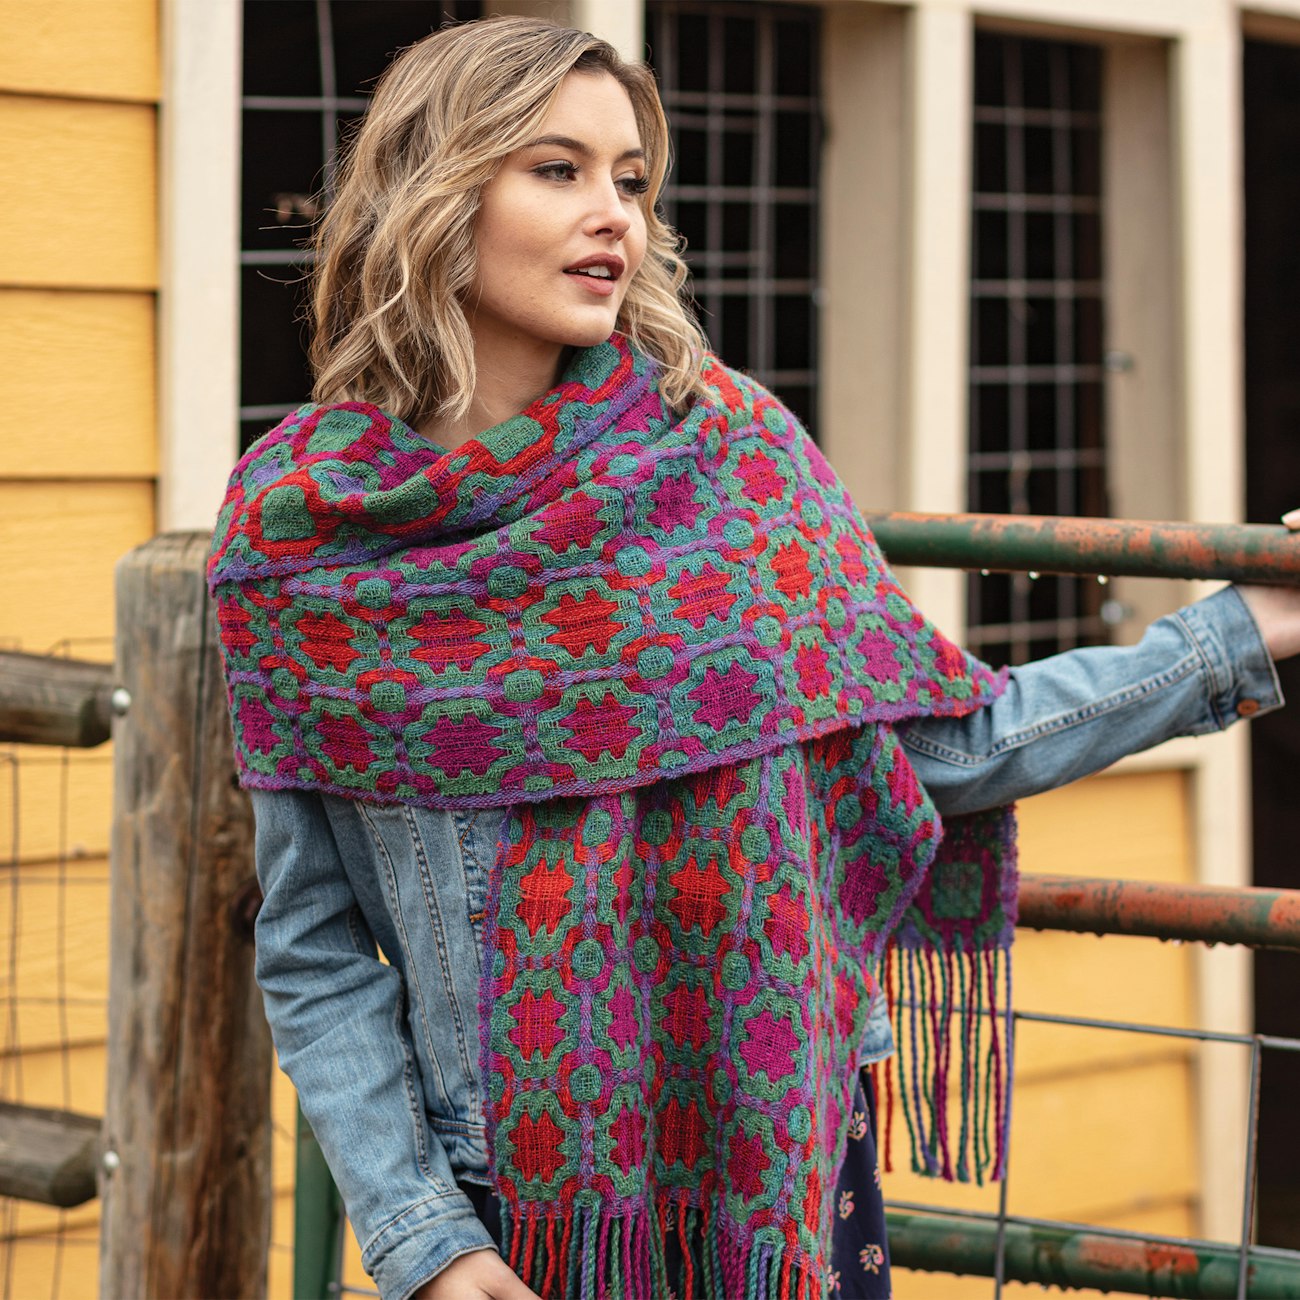 The Gilia and Locoweed Shawl by Dorothy Tuthill was inspired by a summer hike during wildflower season. The use of magenta and other red hues make a fabulous color palette. From Handwoven Mar/Apr 2020. Photo by George Boe.